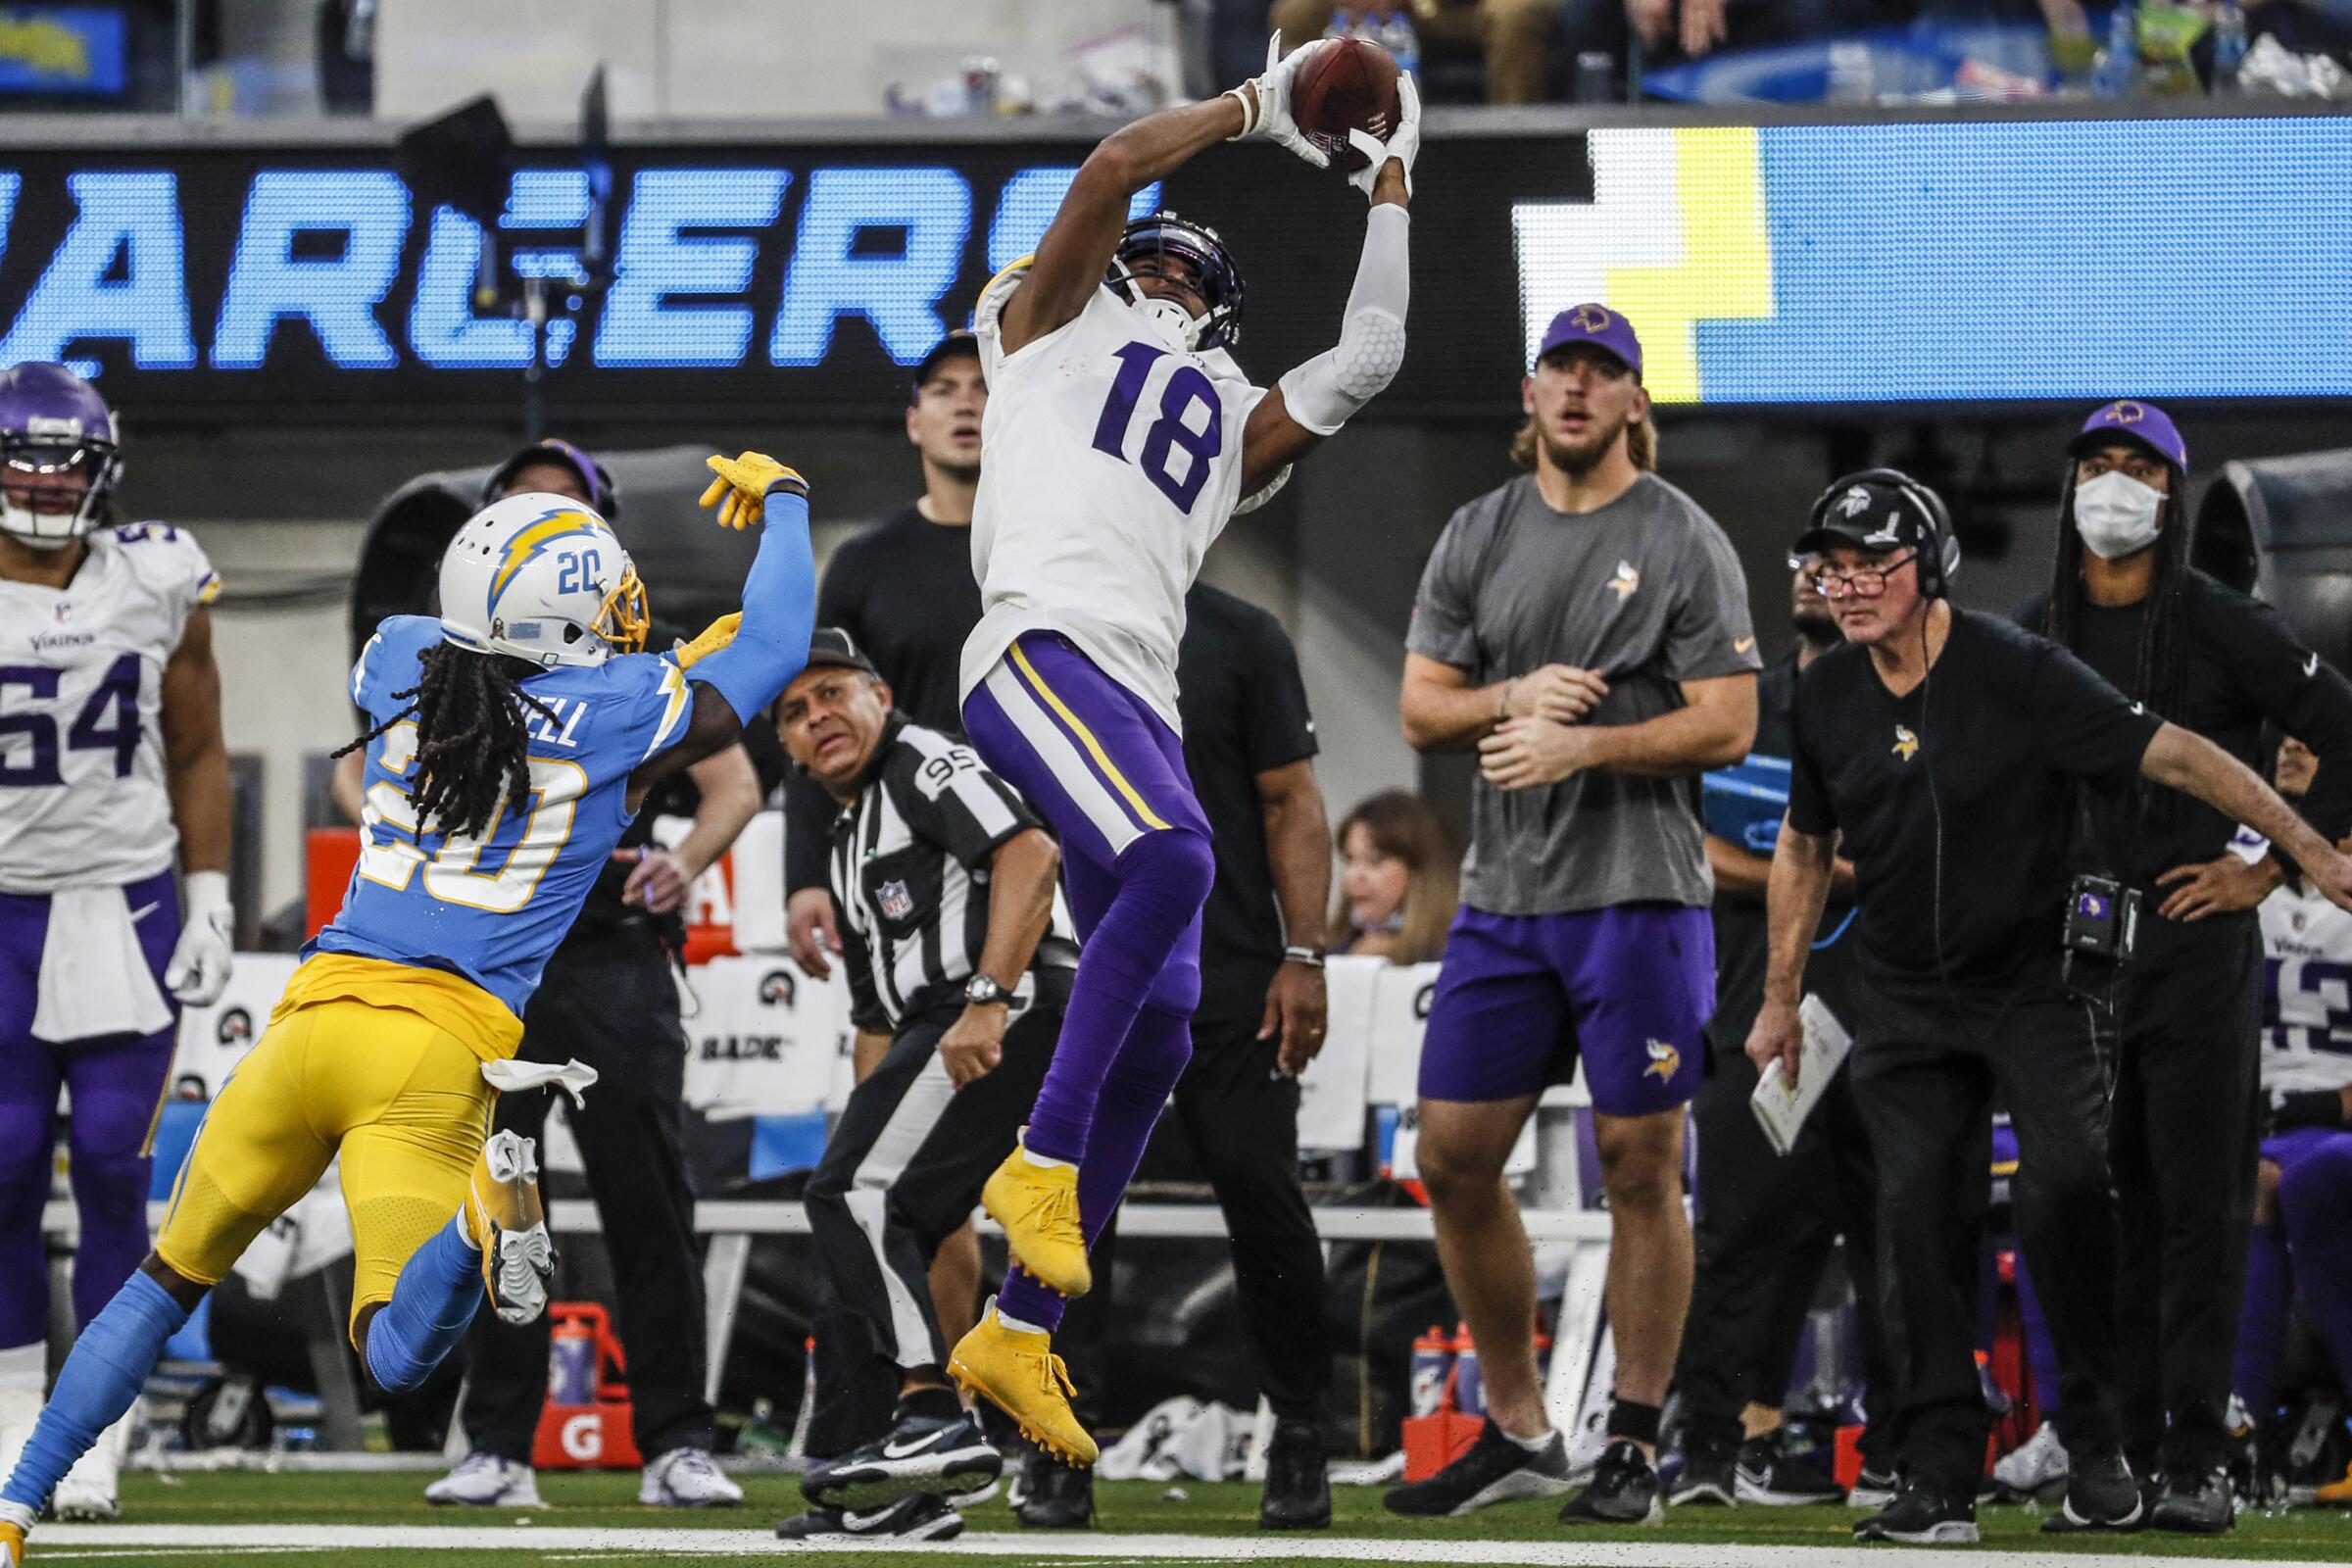 Vikings receiver Justin Jefferson catches a pass.